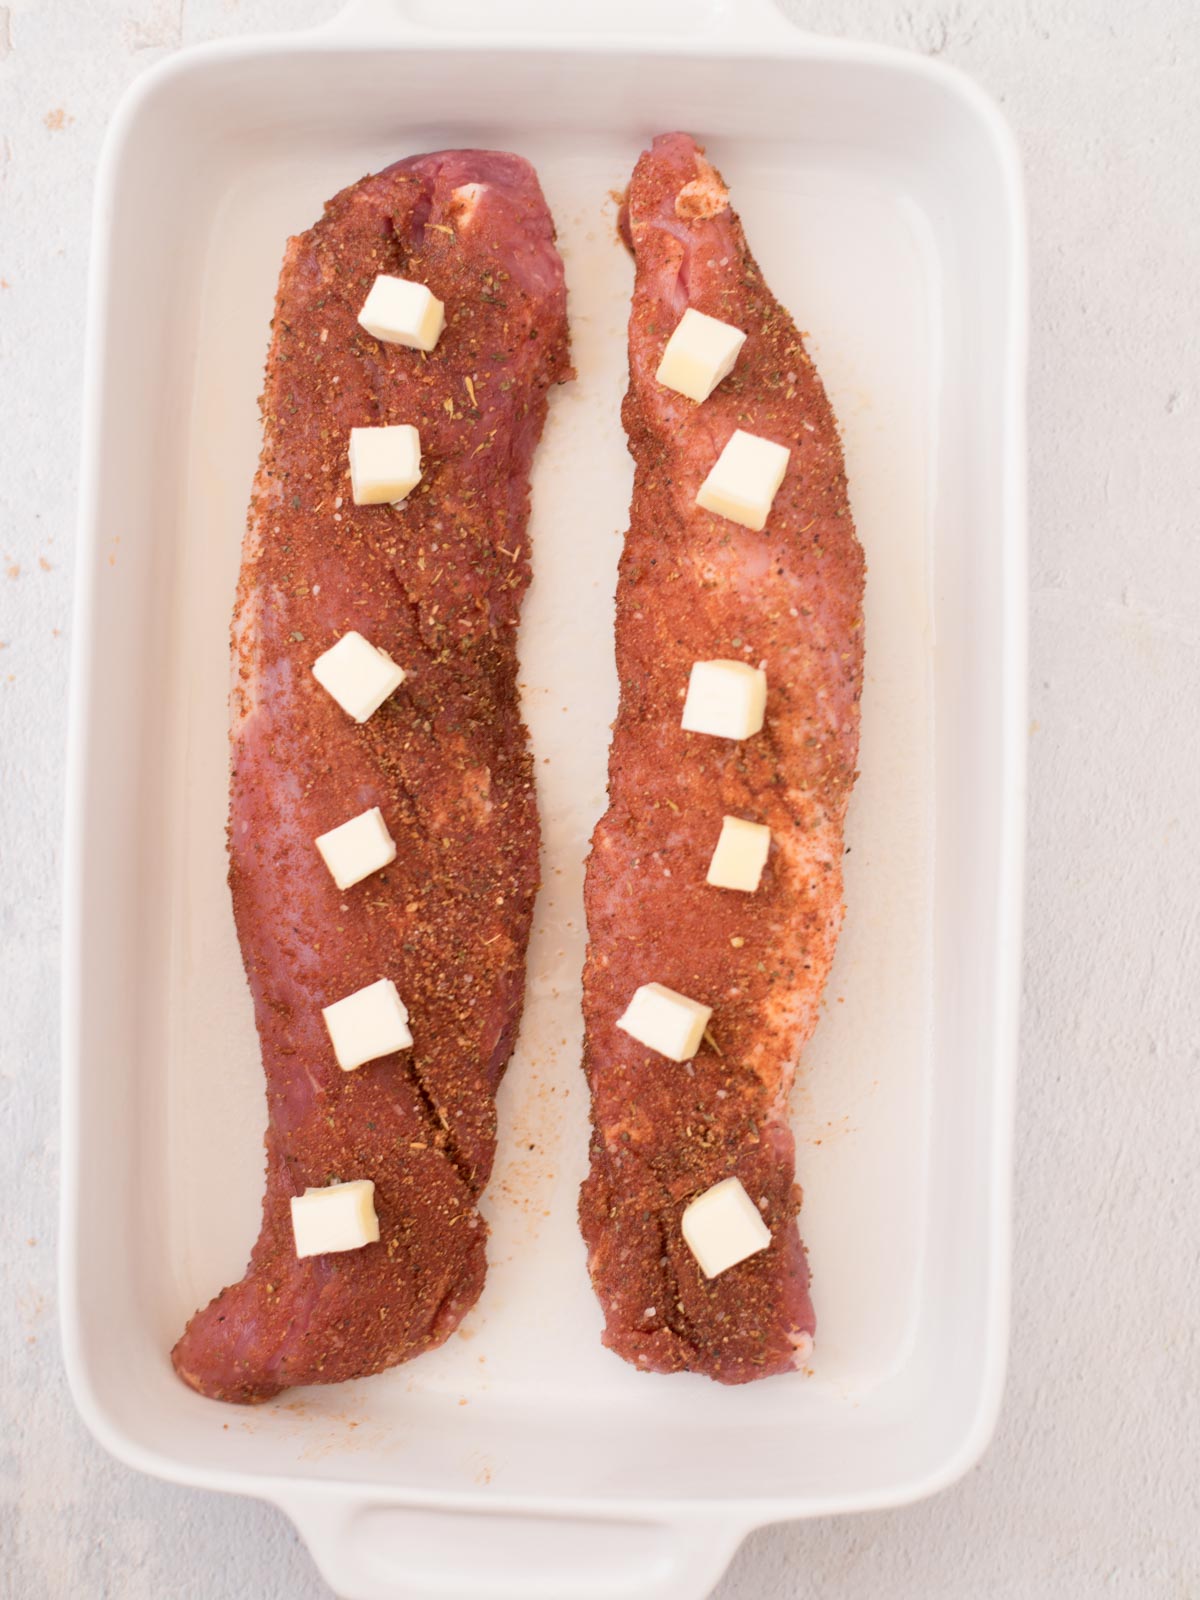 raw pork tenderloin in a baking dish seasoned and topped with cubes of butter